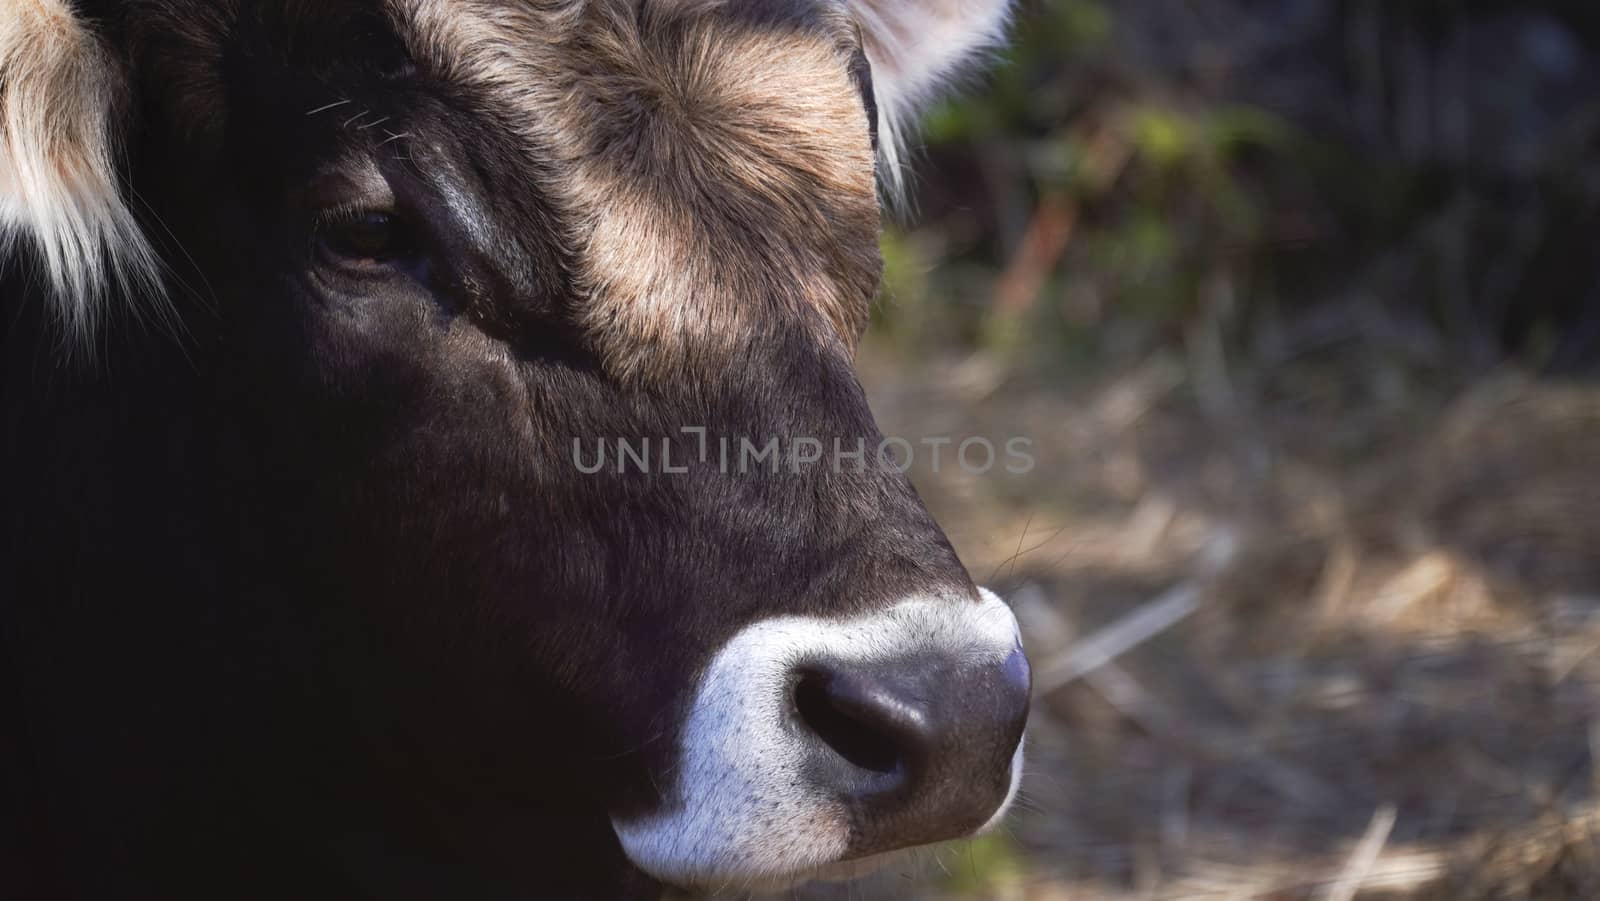 Farm animals in freedom concept: side closeup of the muzzle of a dark brown cow looking into the camera